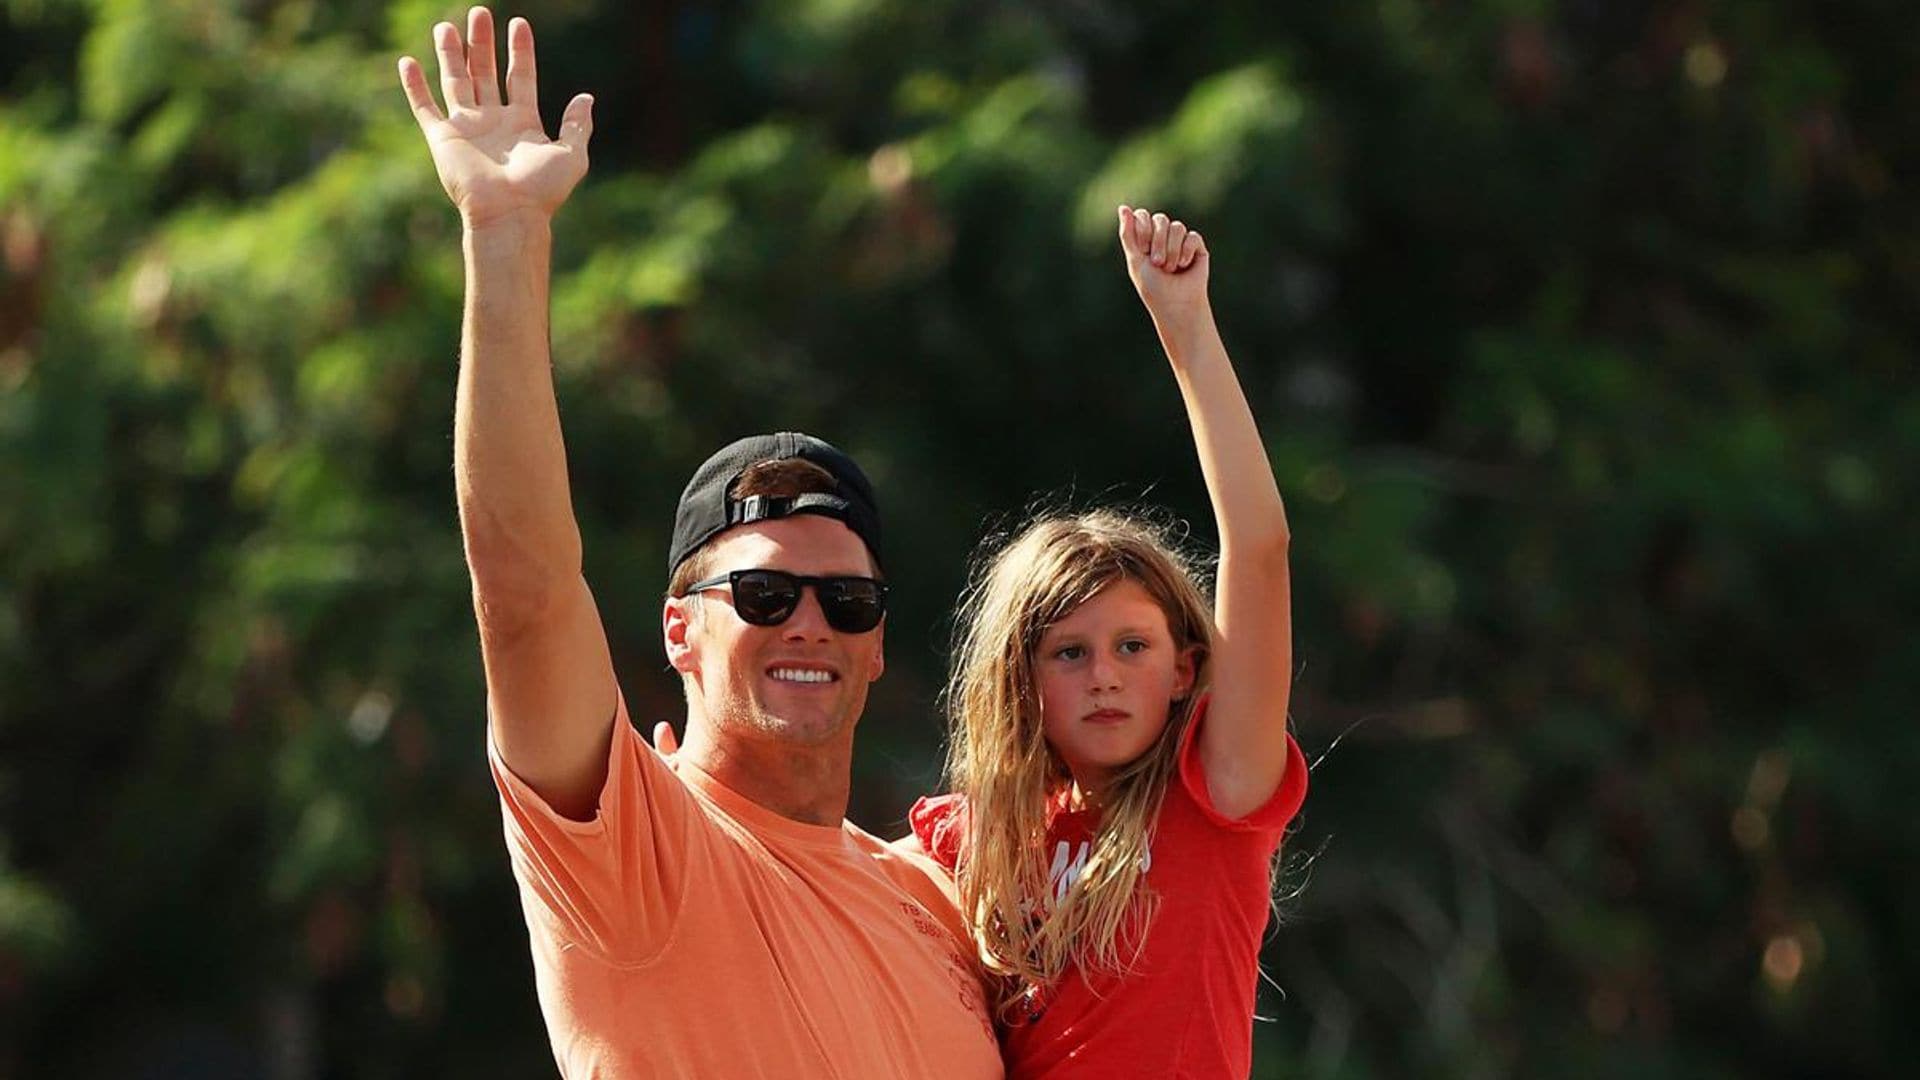 Tom Brady celebrated his 46th birthday with a safari vacation with his daughter Vivian